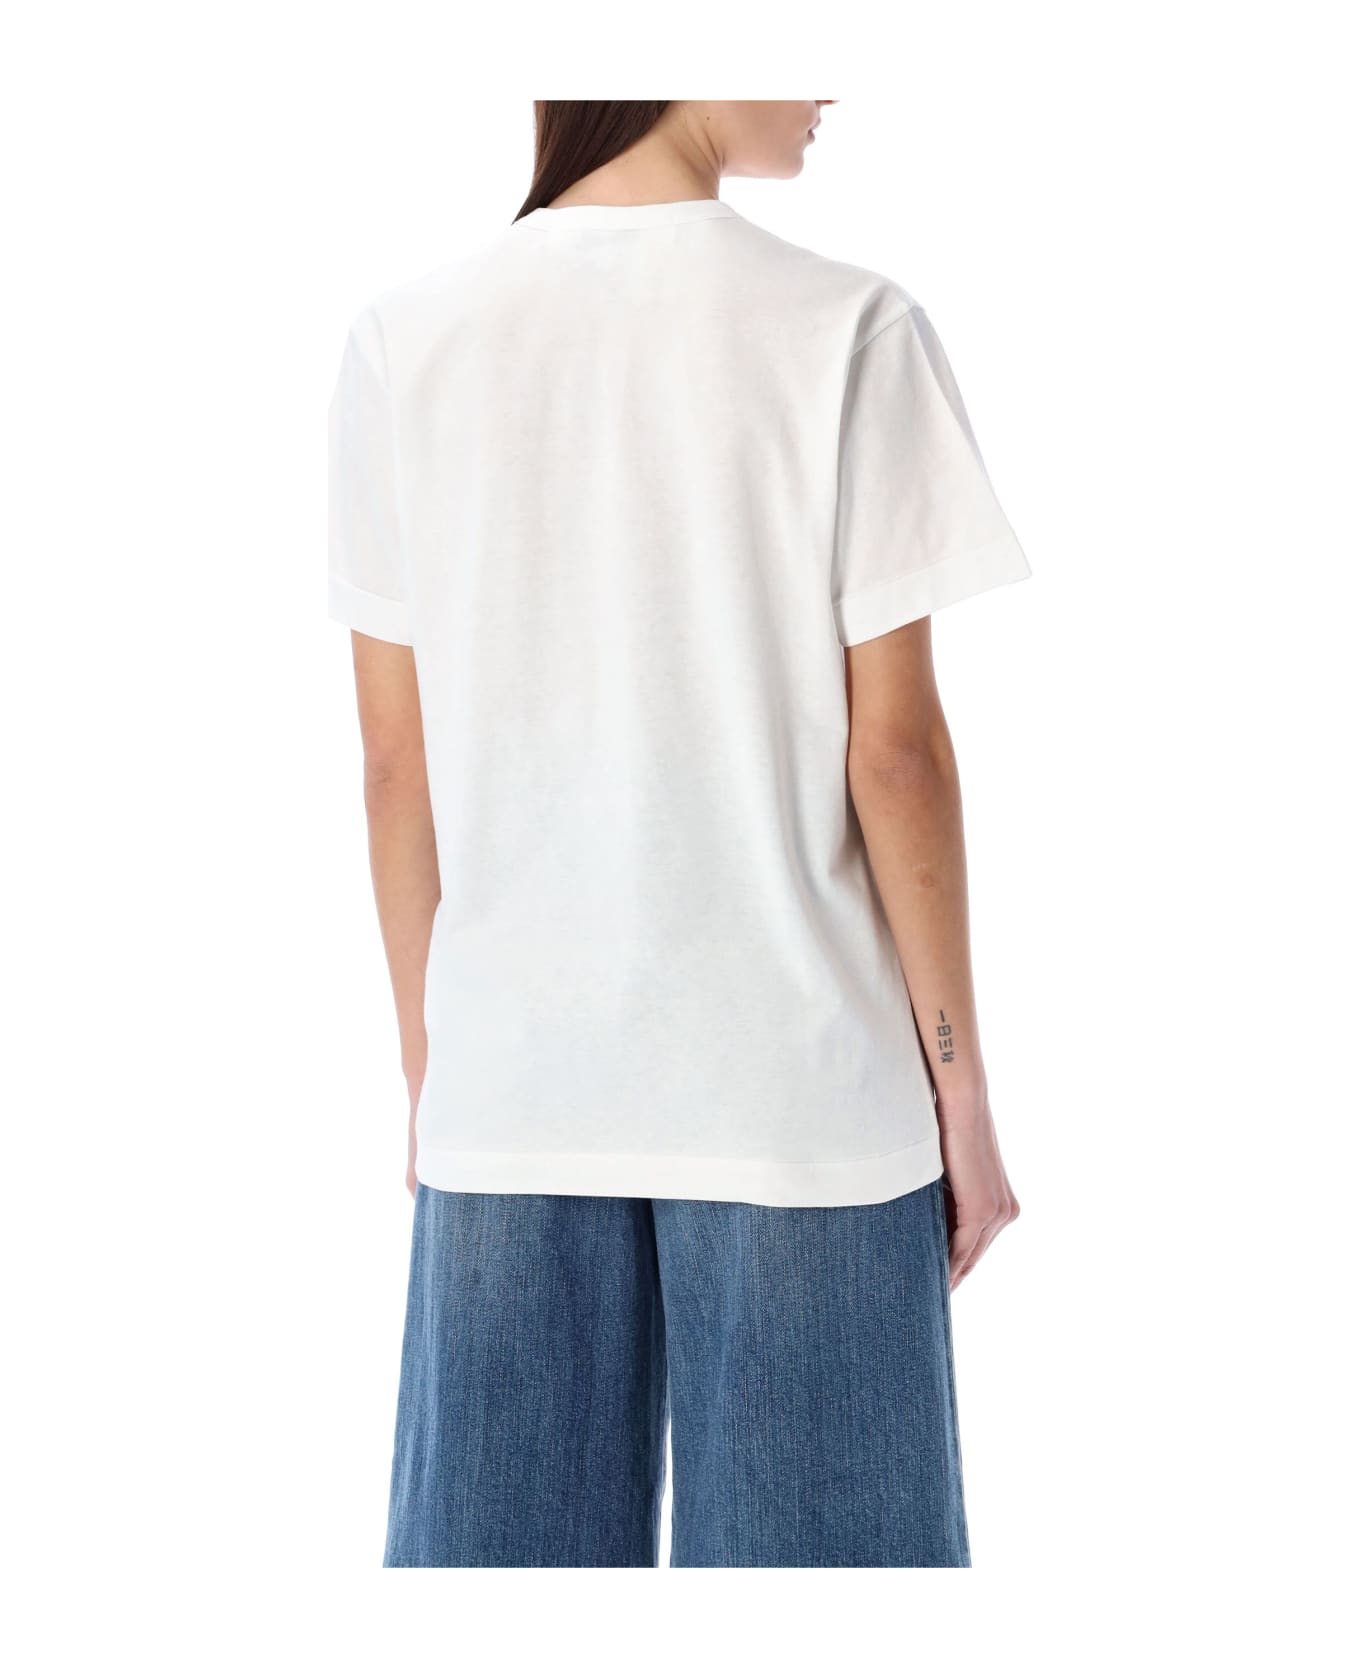 Comme des Garçons Play Red Hearts T-shirt - WHITE Tシャツ